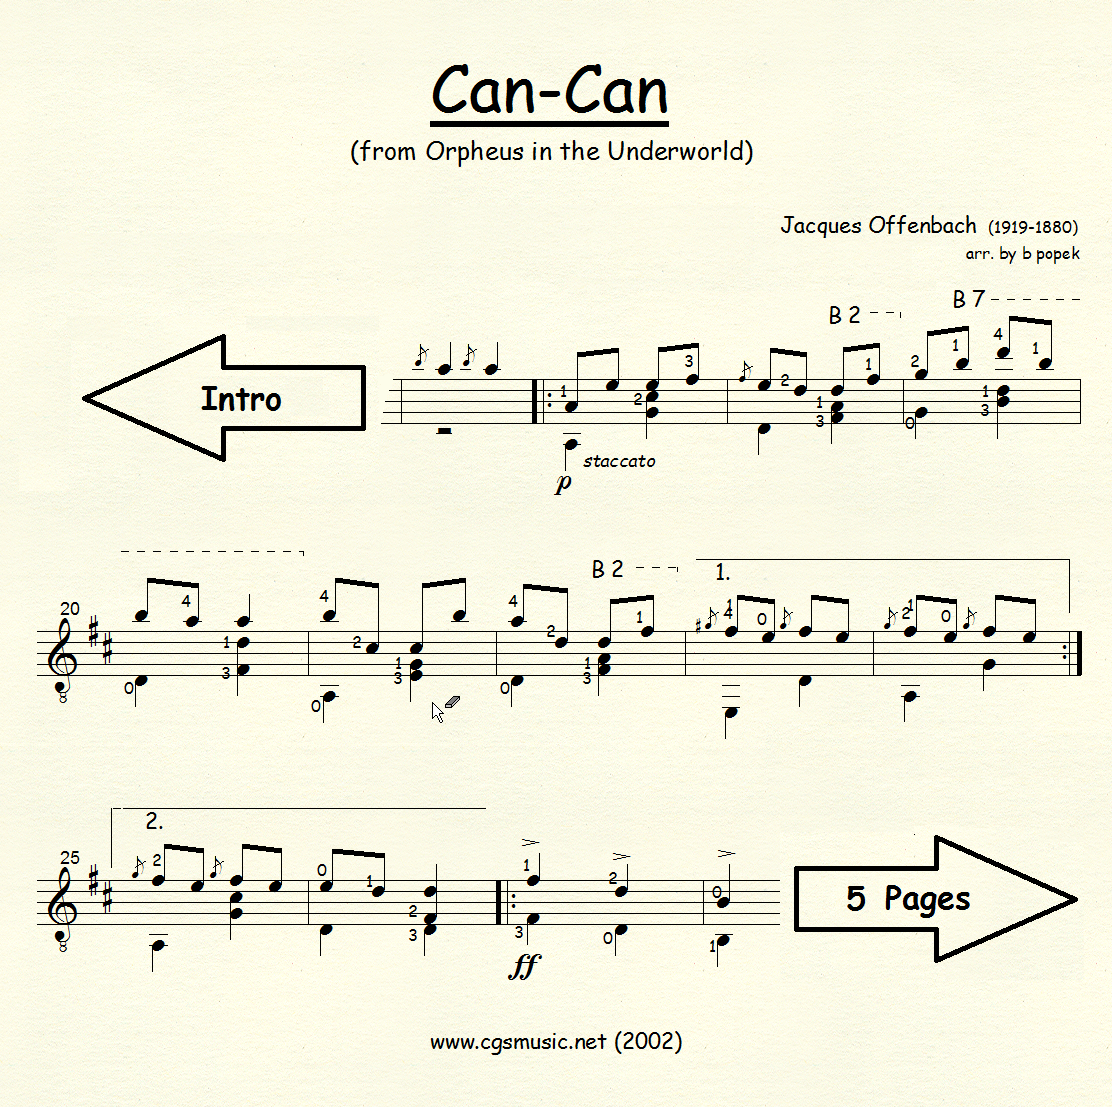 Can-Can (Offenbach) for Classical Guitar in Standard Notation